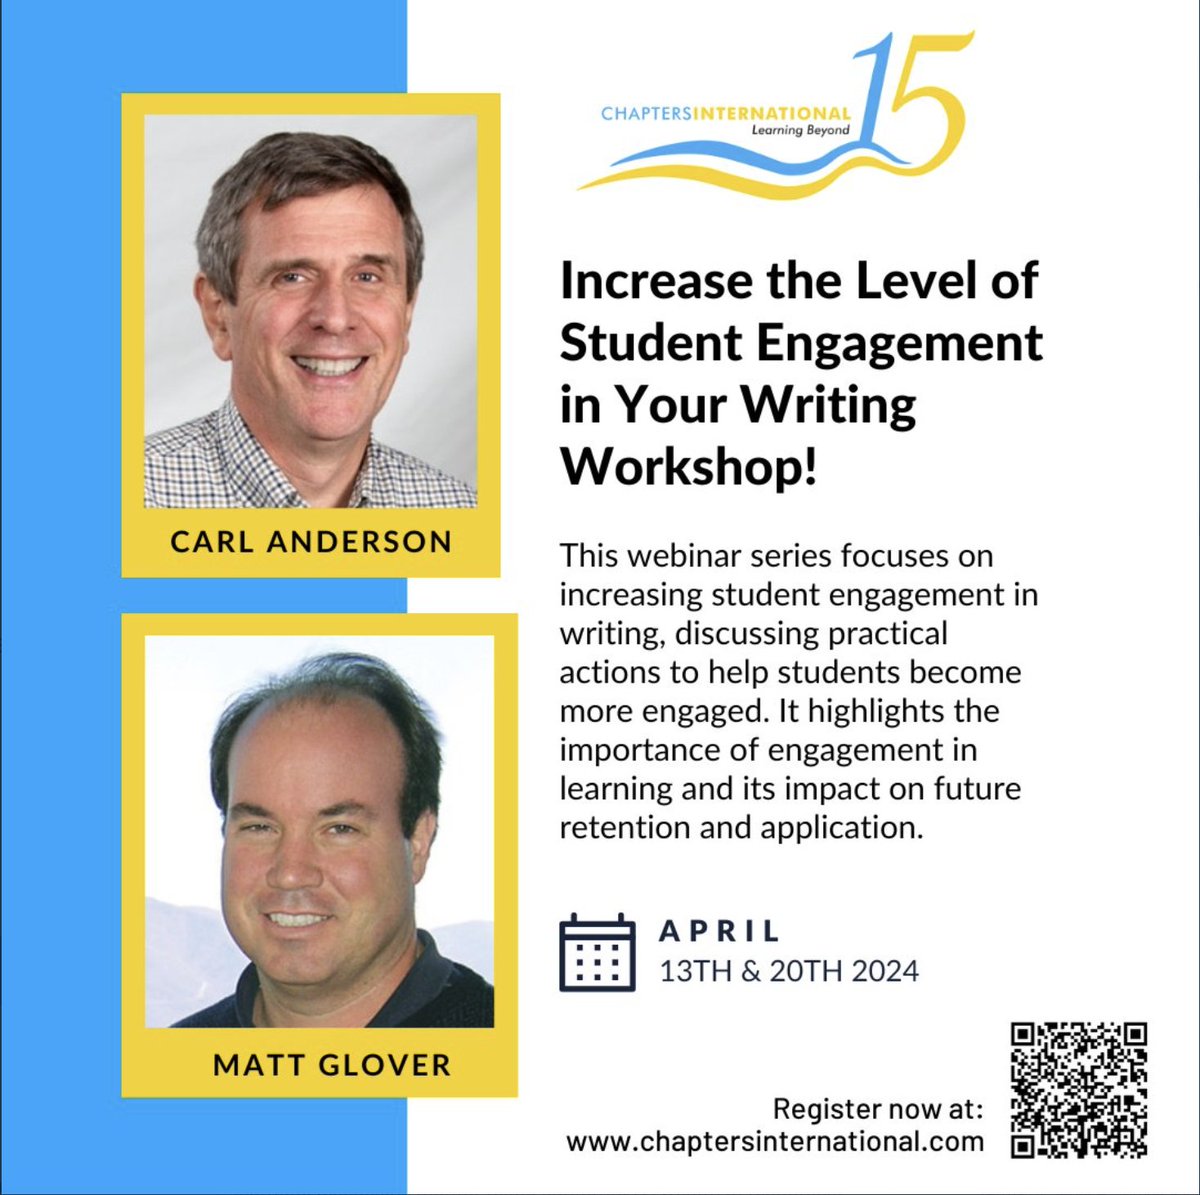 In just a few weeks, on April 13 & 20, @Mattglover123 and I are doing a two-part webinar with @ChaptersInt on increasing student engagement in writing. Join us! Details: chaptersinternational.com/mailer/carl_ma…